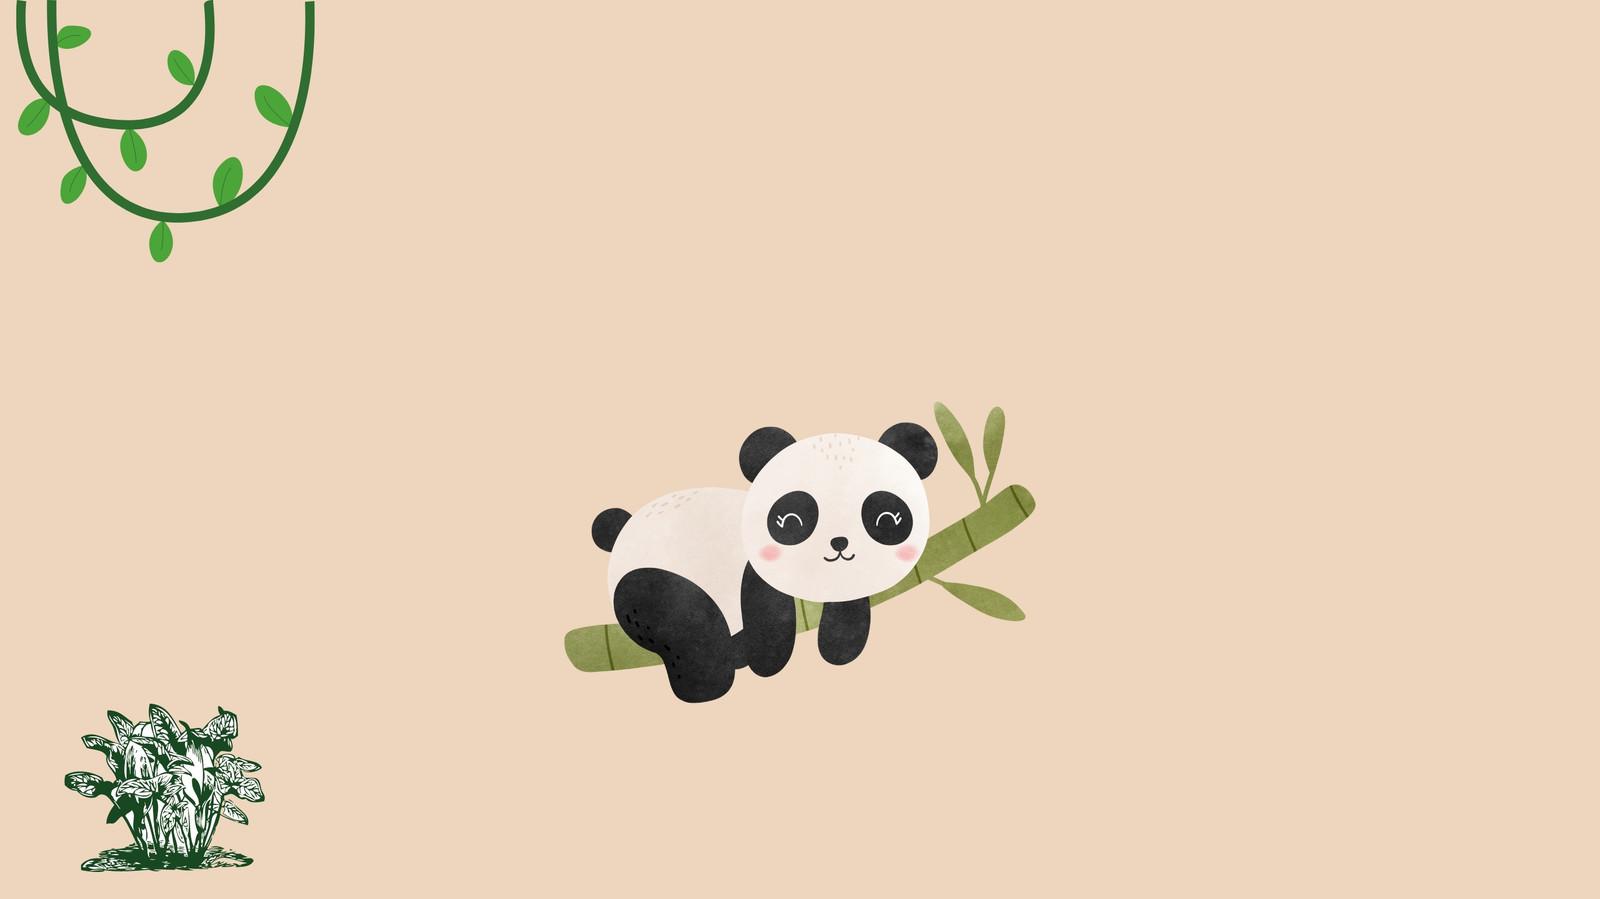 And Customizable Cute Animation Wallpaper Templates